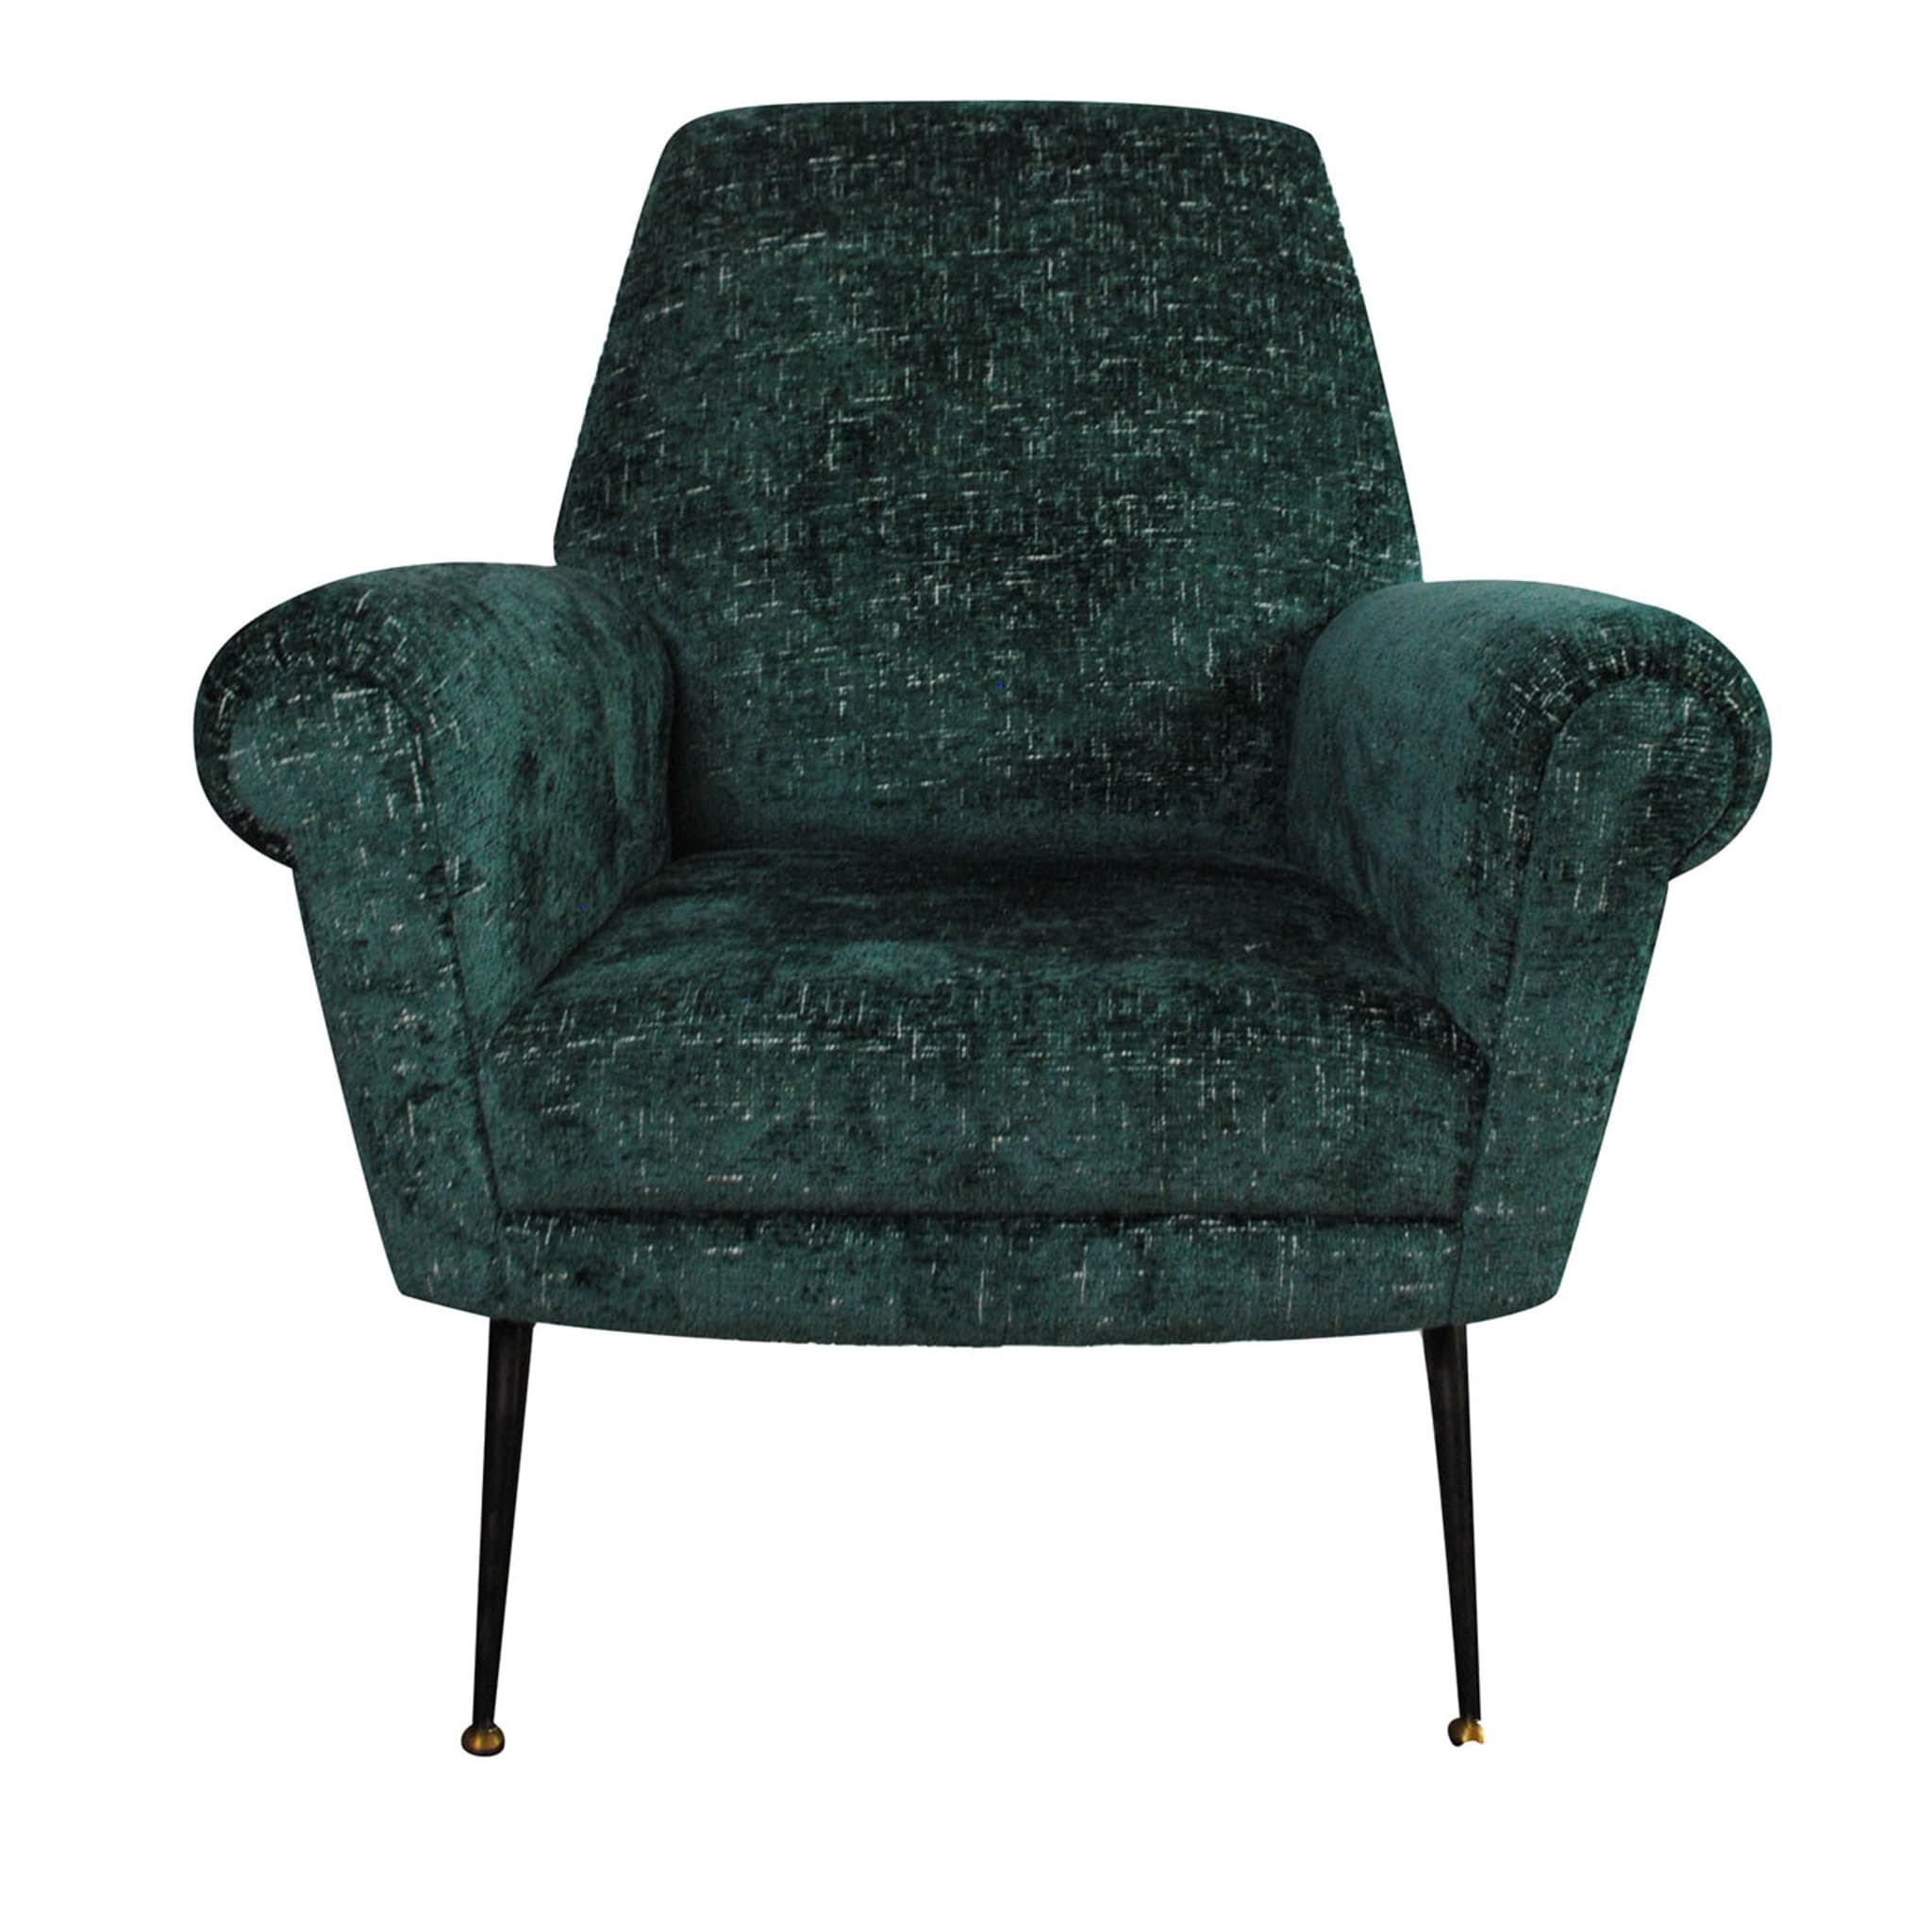 Real Vintage Green Armchair - Main view